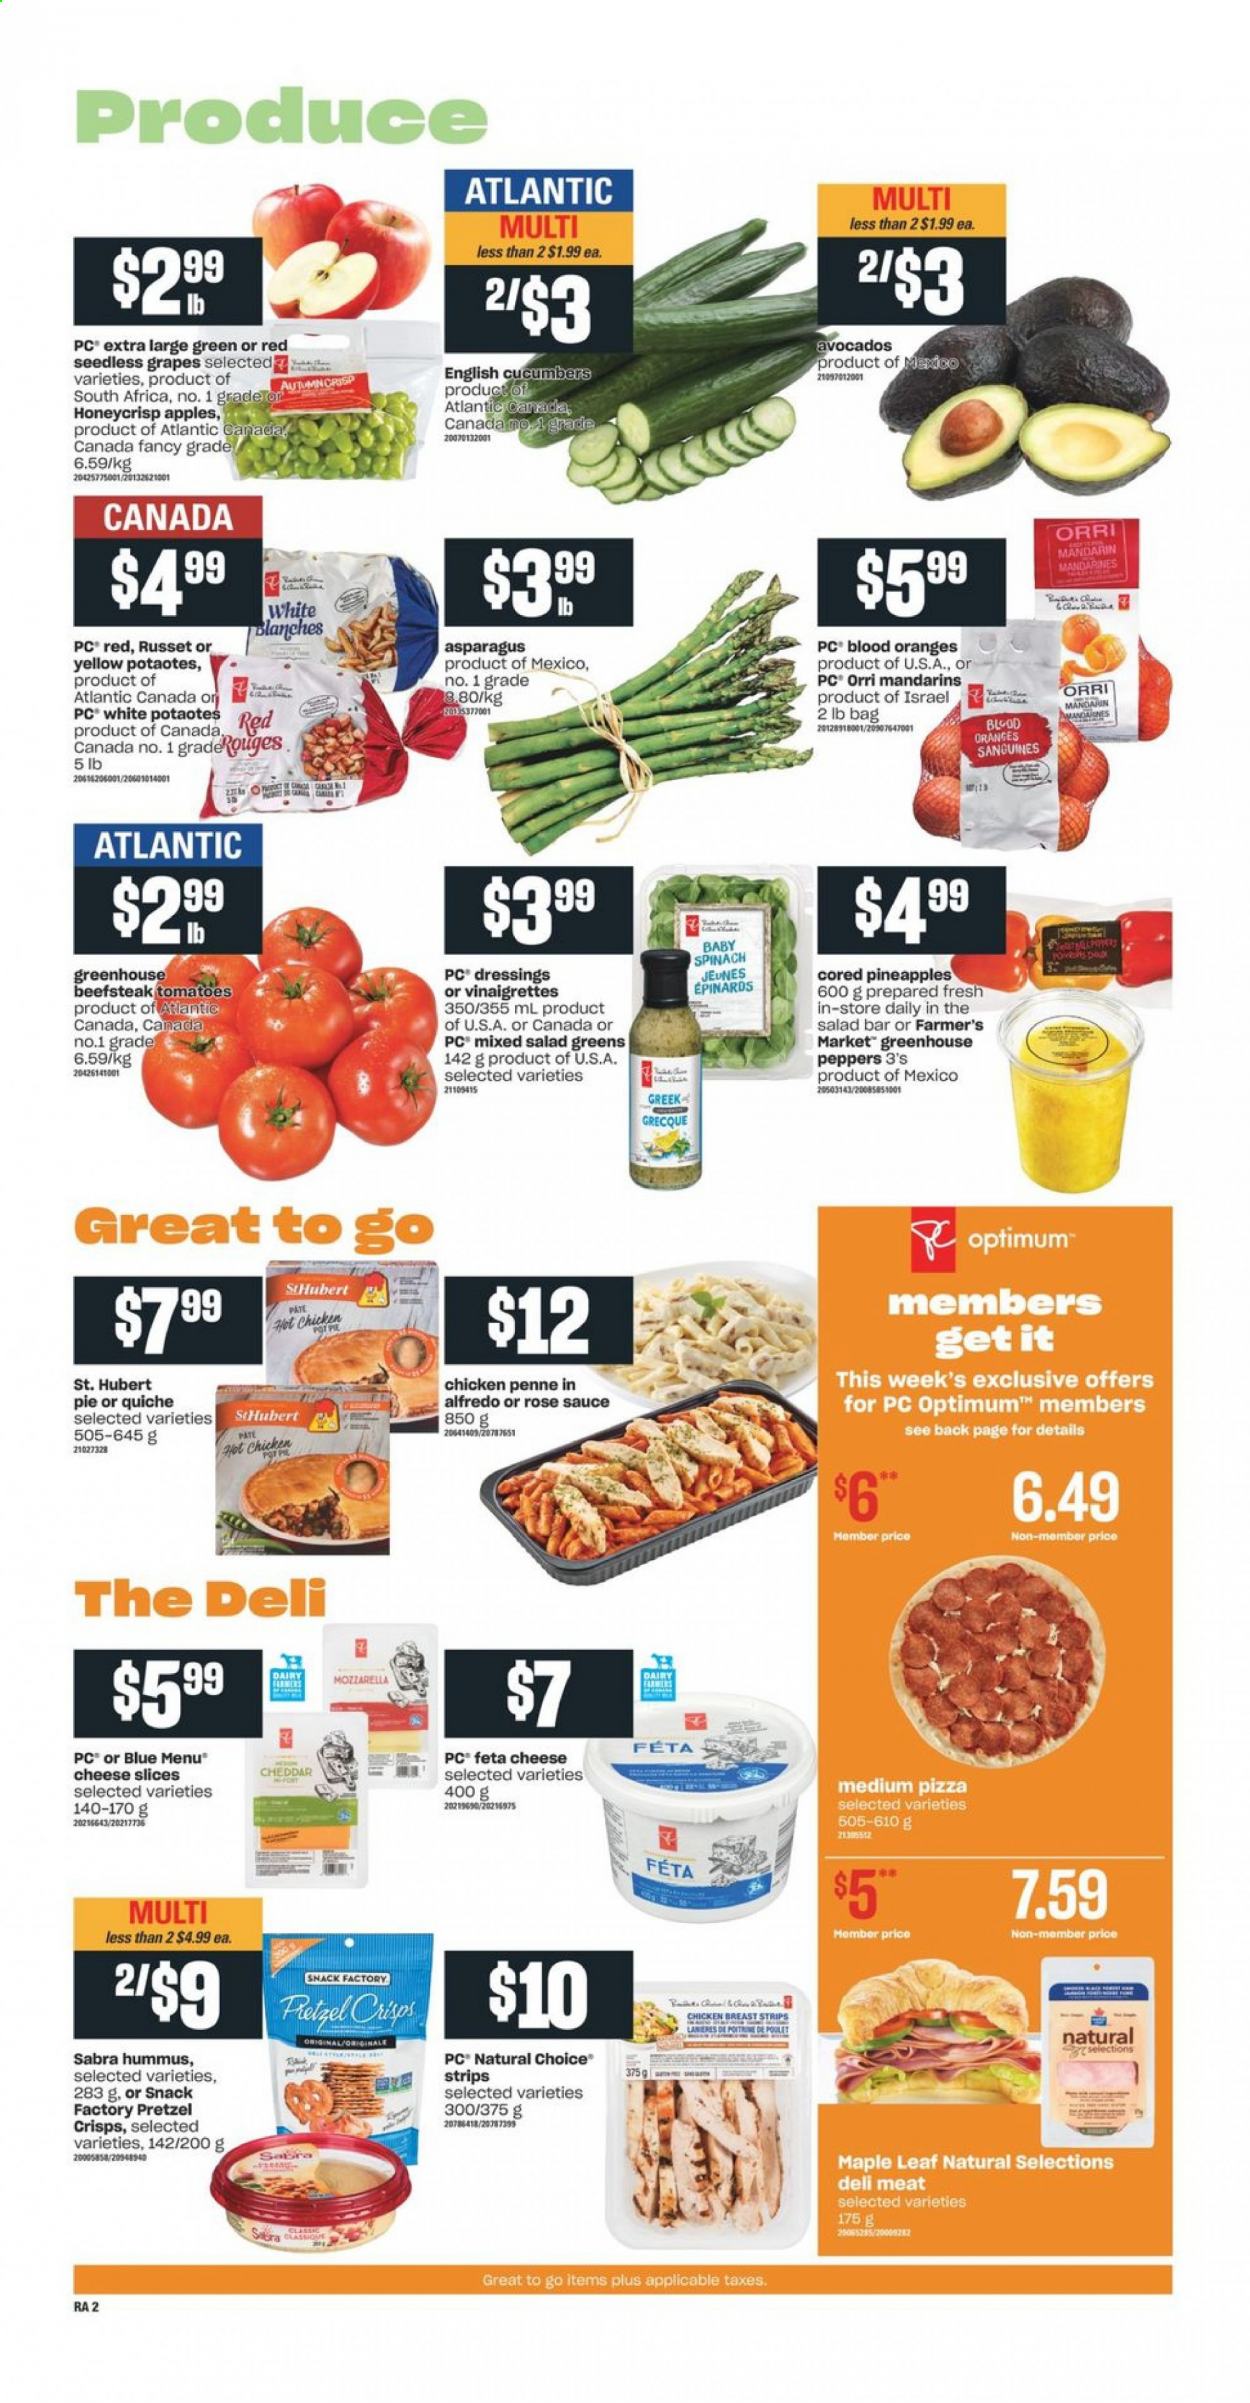 Atlantic Superstore flyer  - March 11, 2021 - March 17, 2021. Page 3.